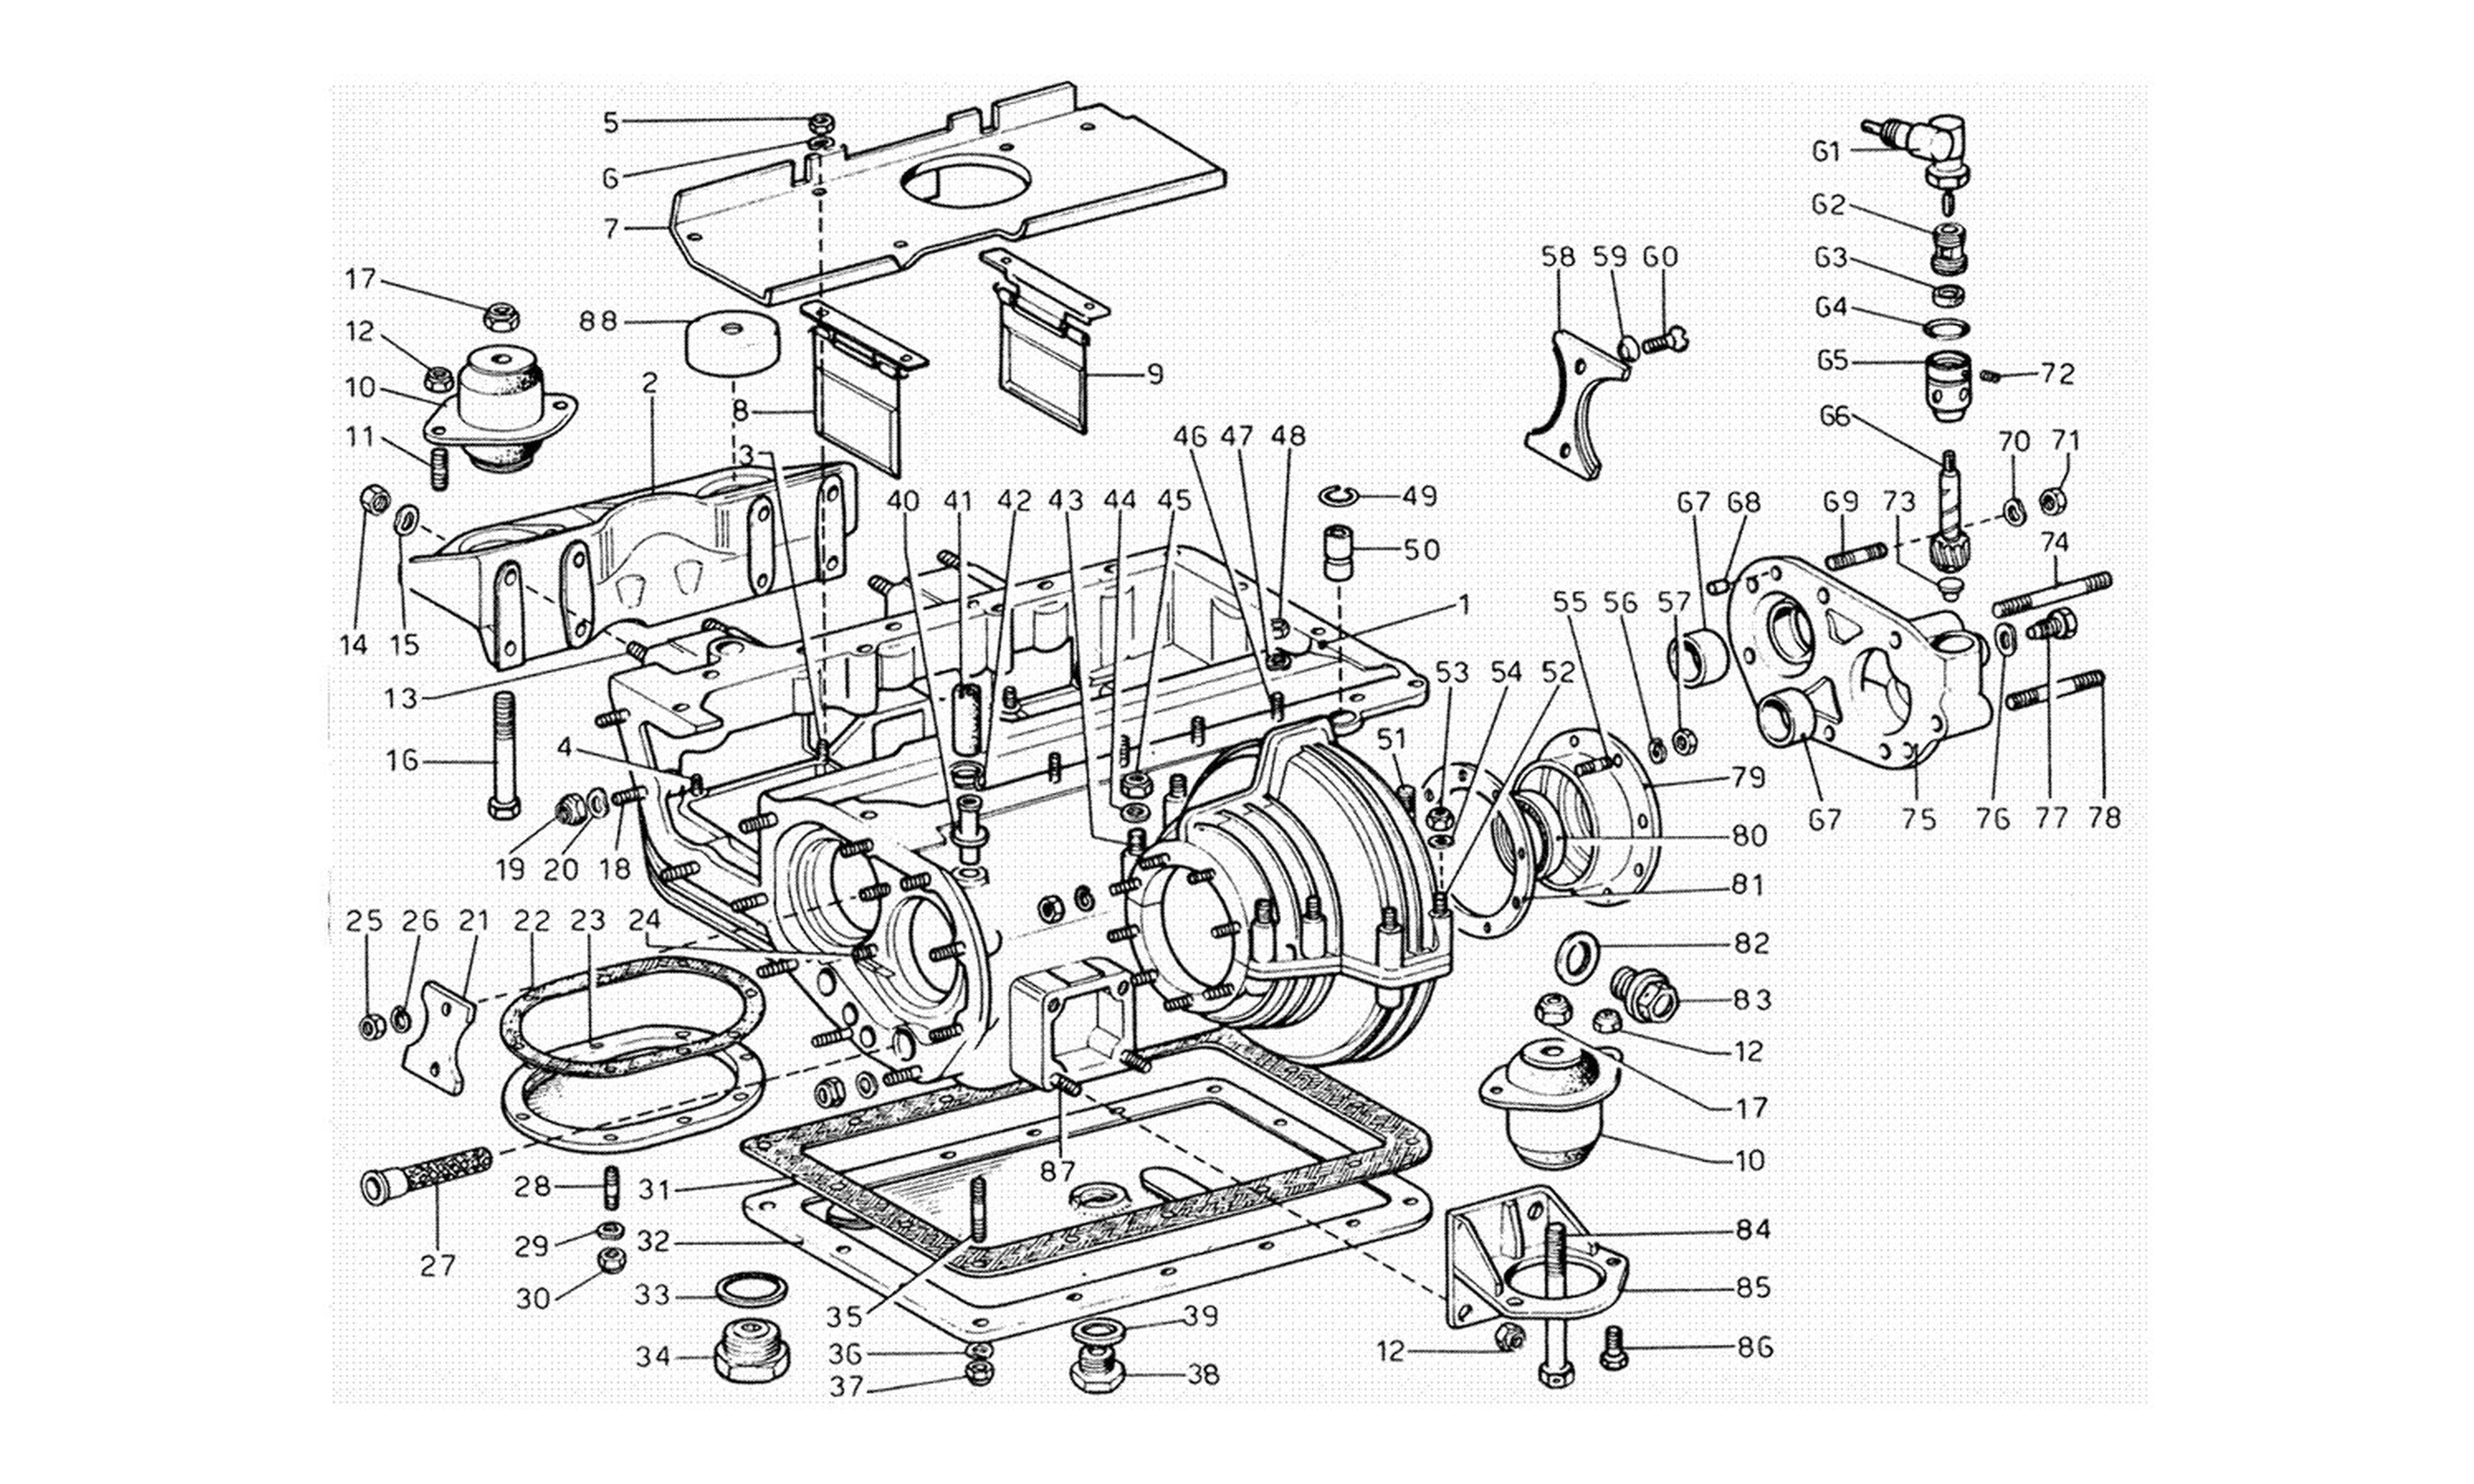 Schematic: Oil Sump Gear Box And Differential